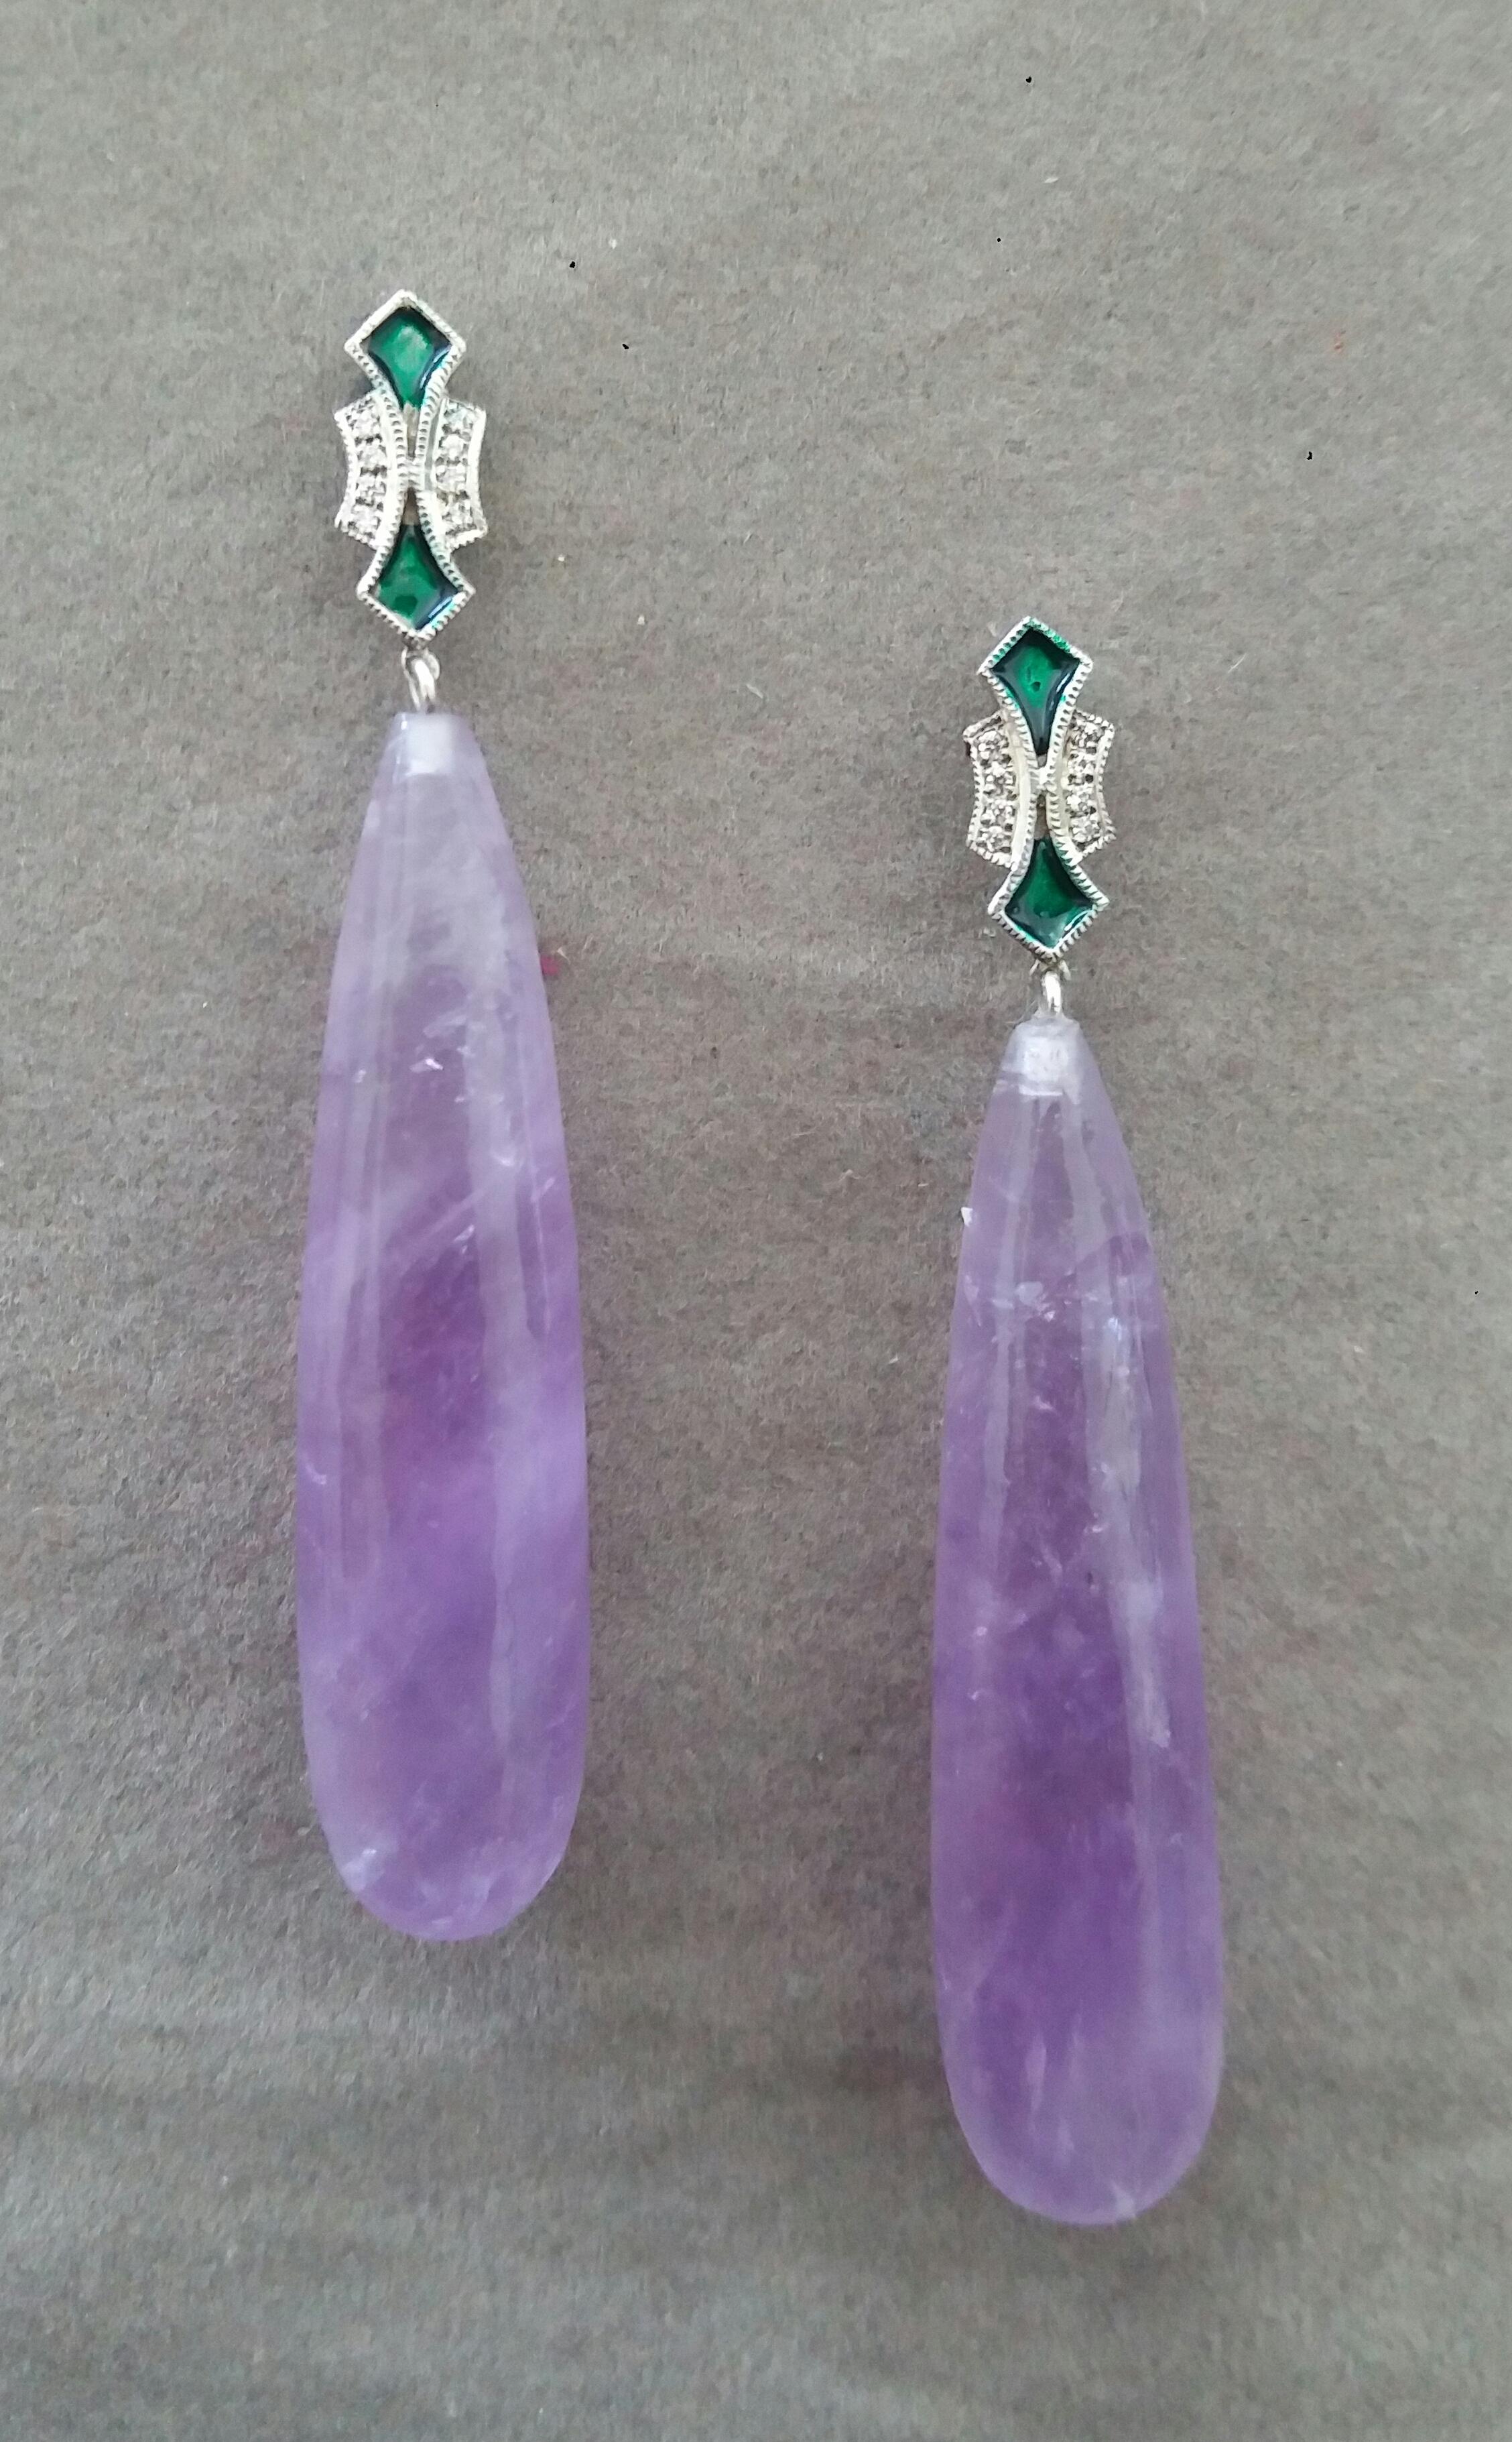 In these Art Deco Style handmade earrings 2 very good quality Natural Amethyst plain drops measuring 10 x  45 mm. are suspended from 2 white 14 kt gold tops  with 16 full cut round diamonds and Green Enamels.

In 1978 our workshop started in Italy